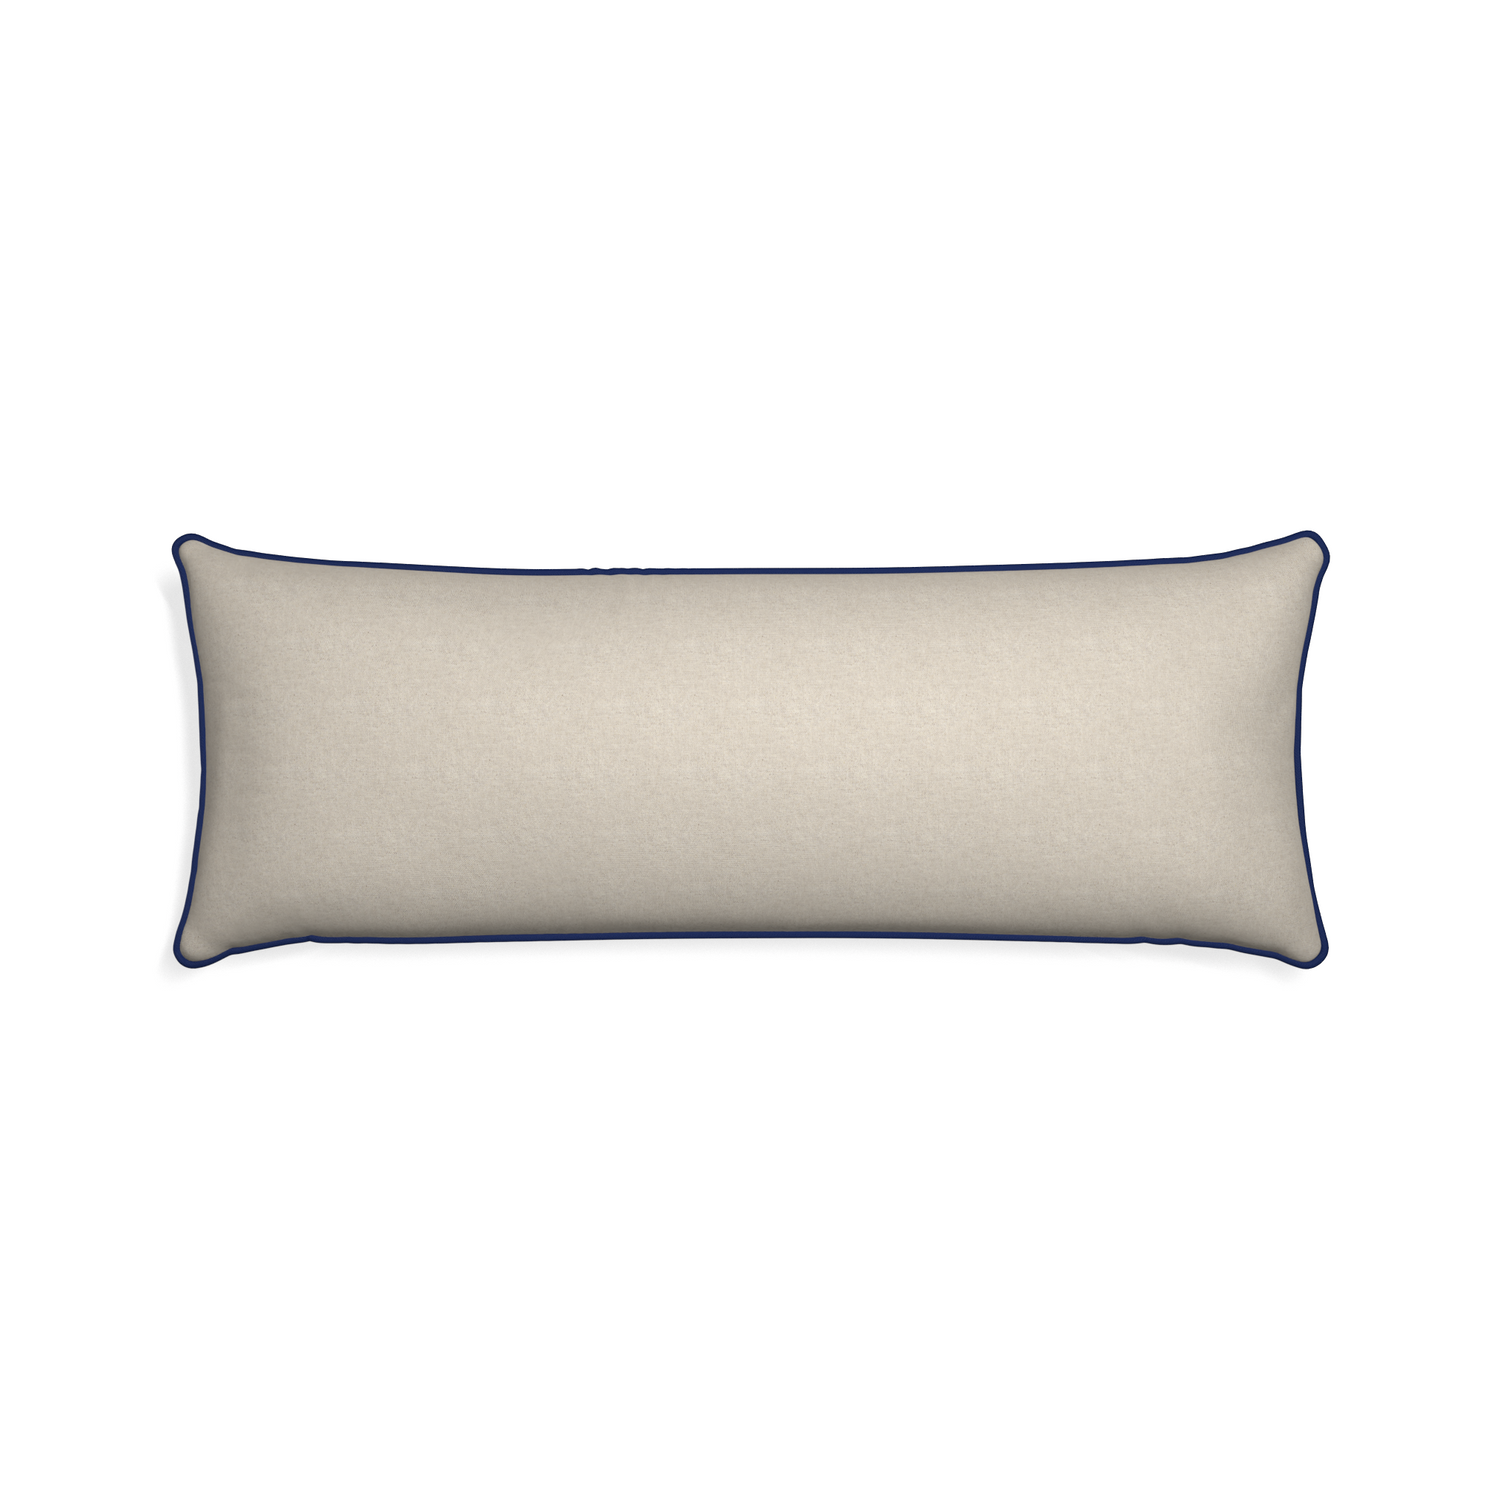 Xl-lumbar oat custom light brownpillow with midnight piping on white background